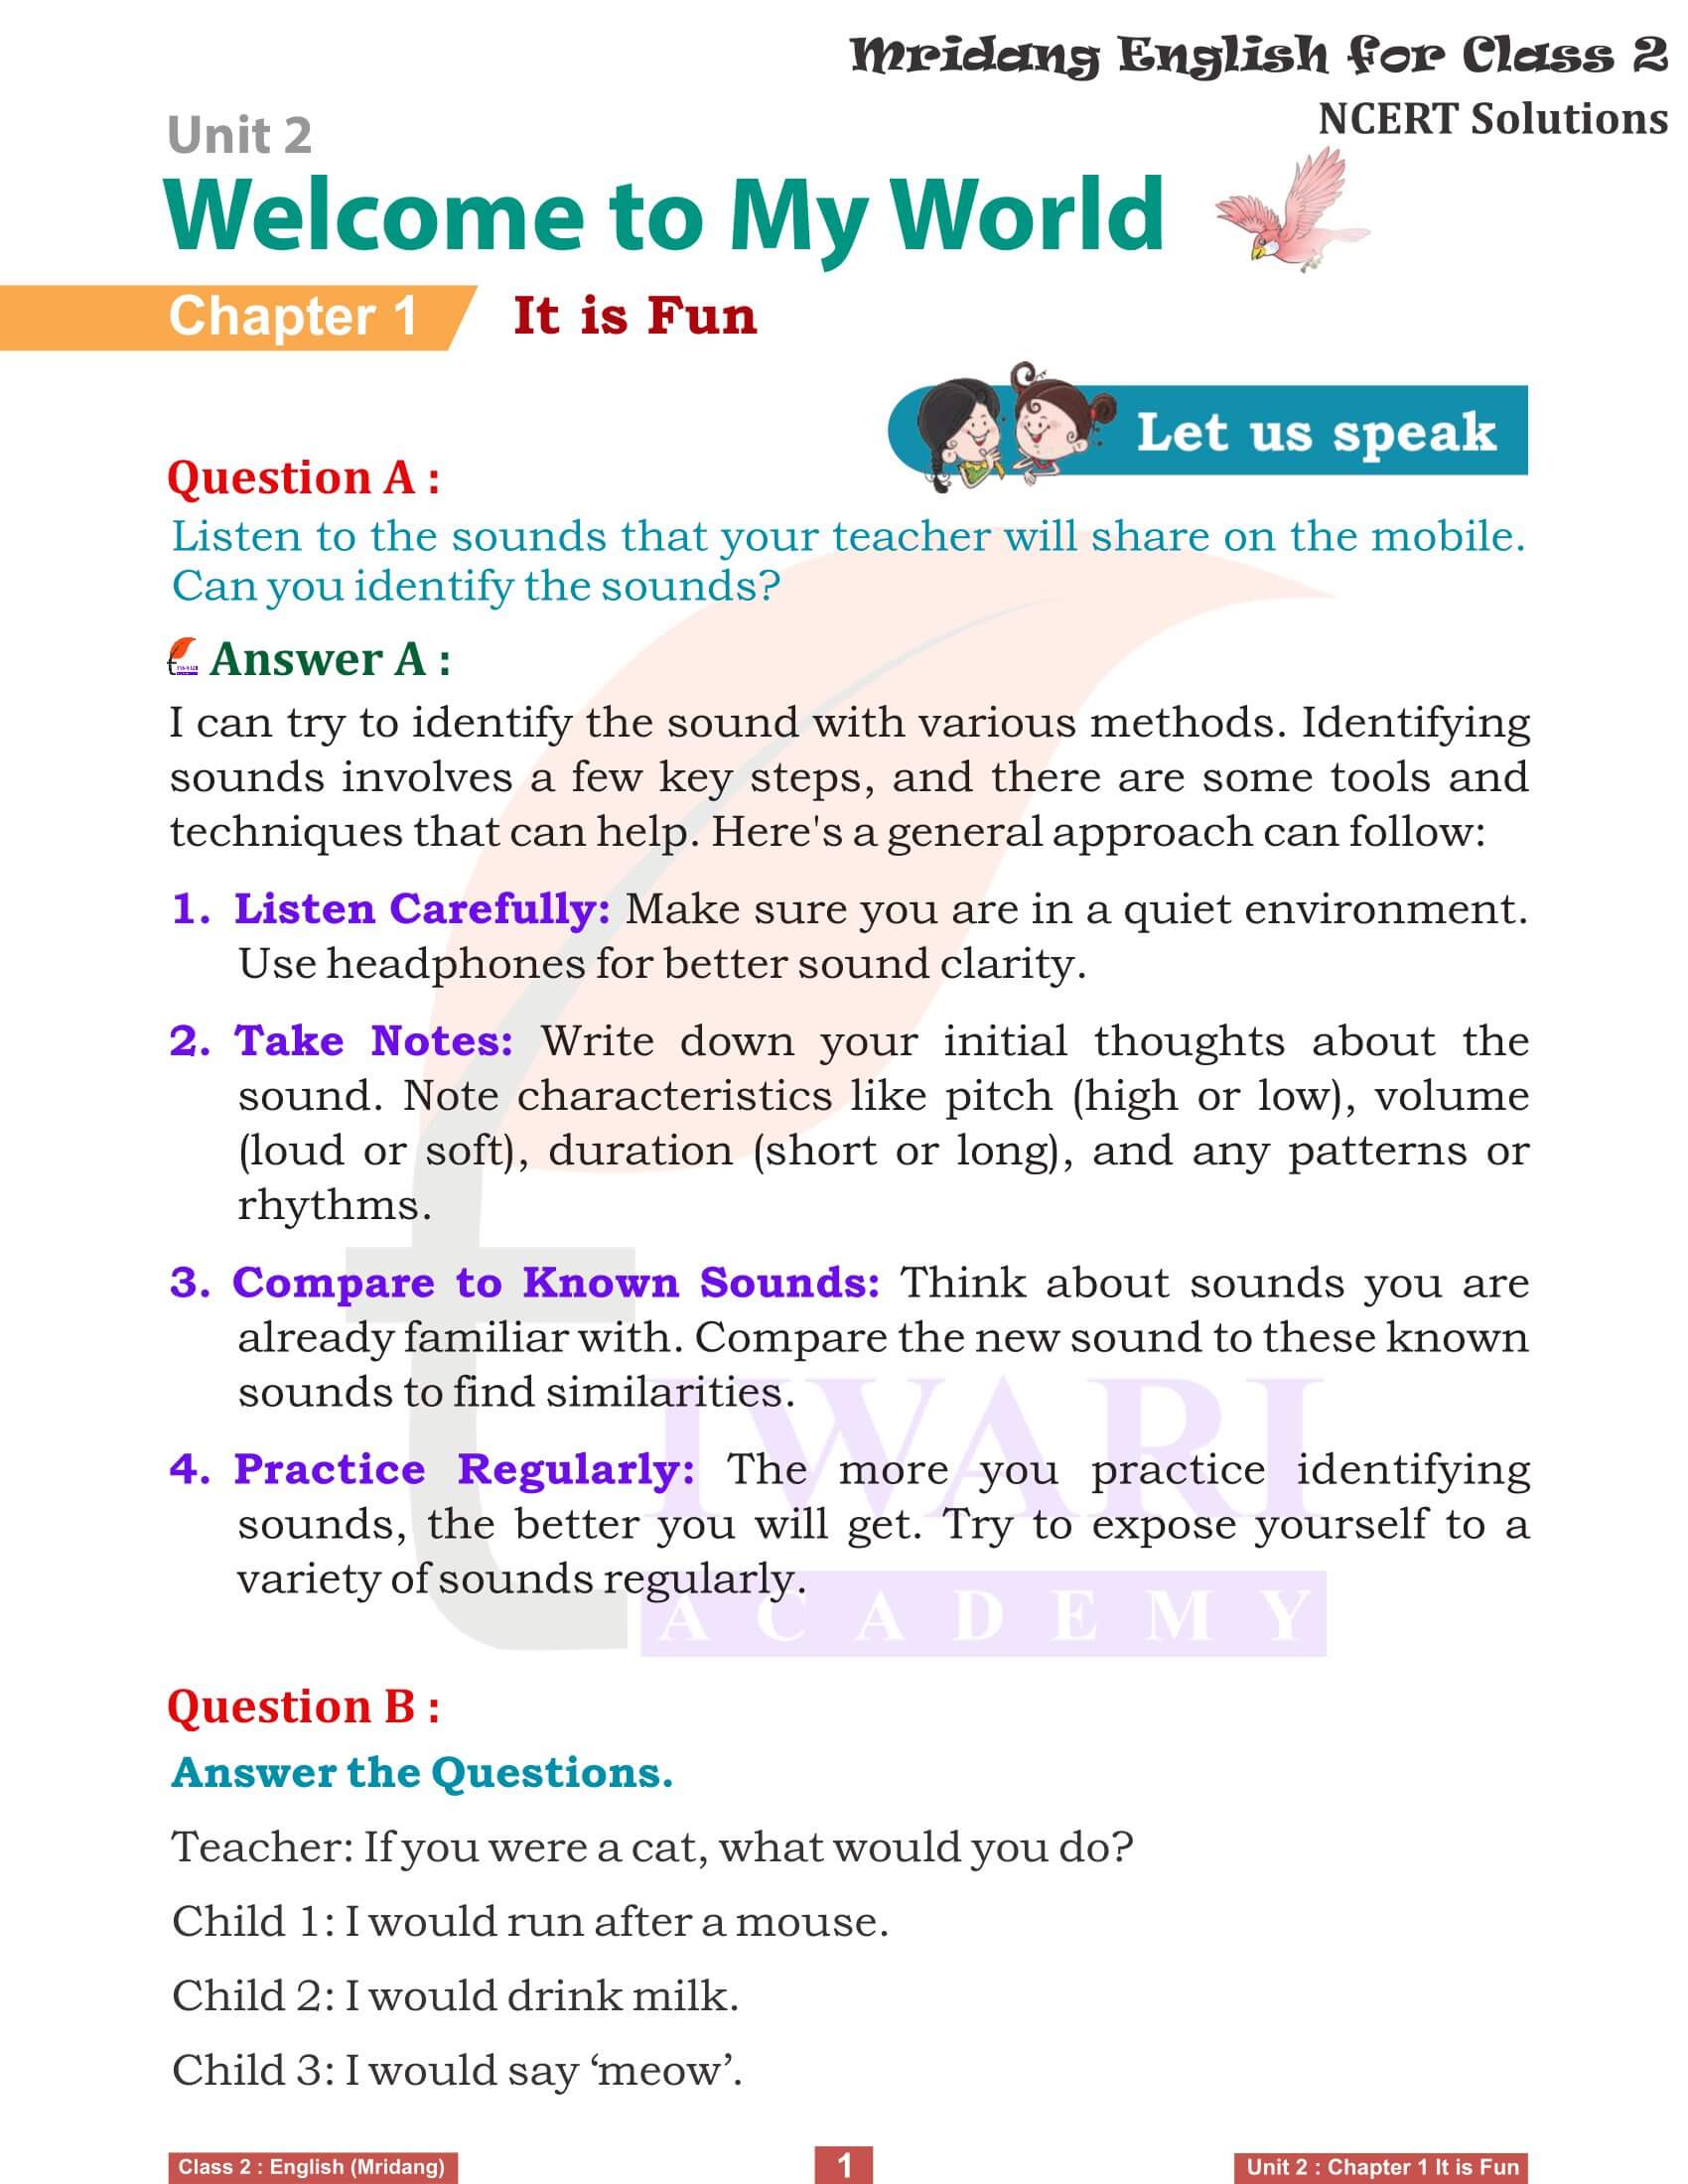 NCERT Solutions for class 2 English Mridang Unit 2 Welcome to My World Chapter 1 It is Fun